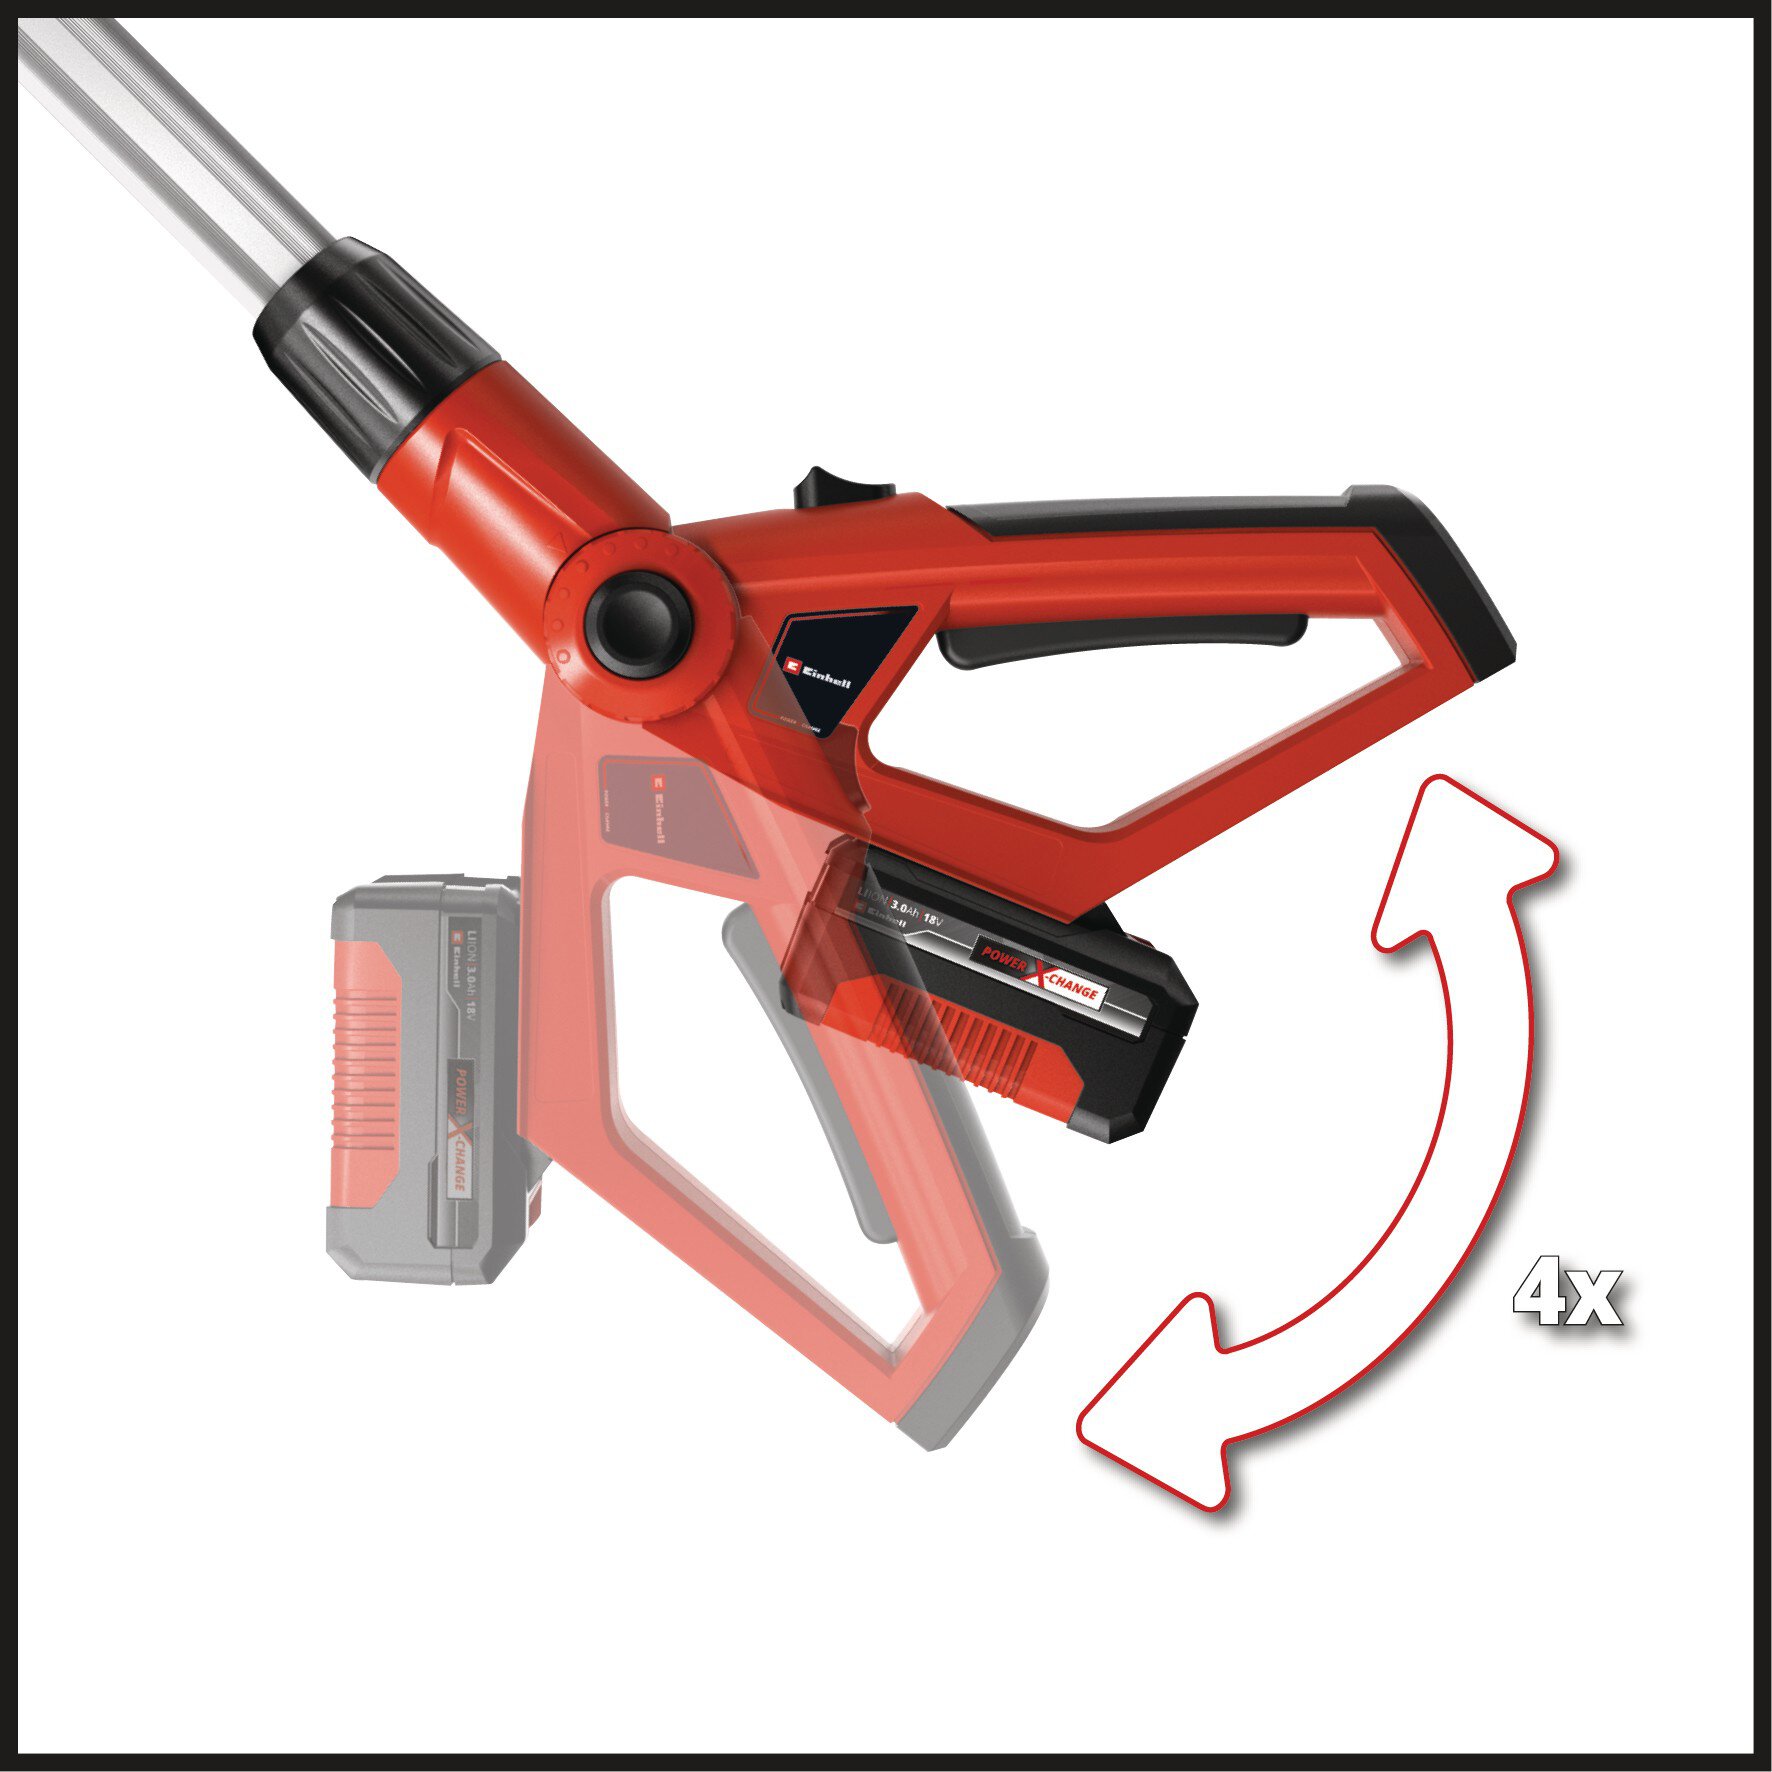 einhell-expert-cl-telescopic-hedge-trimmer-3410866-detail_image-003